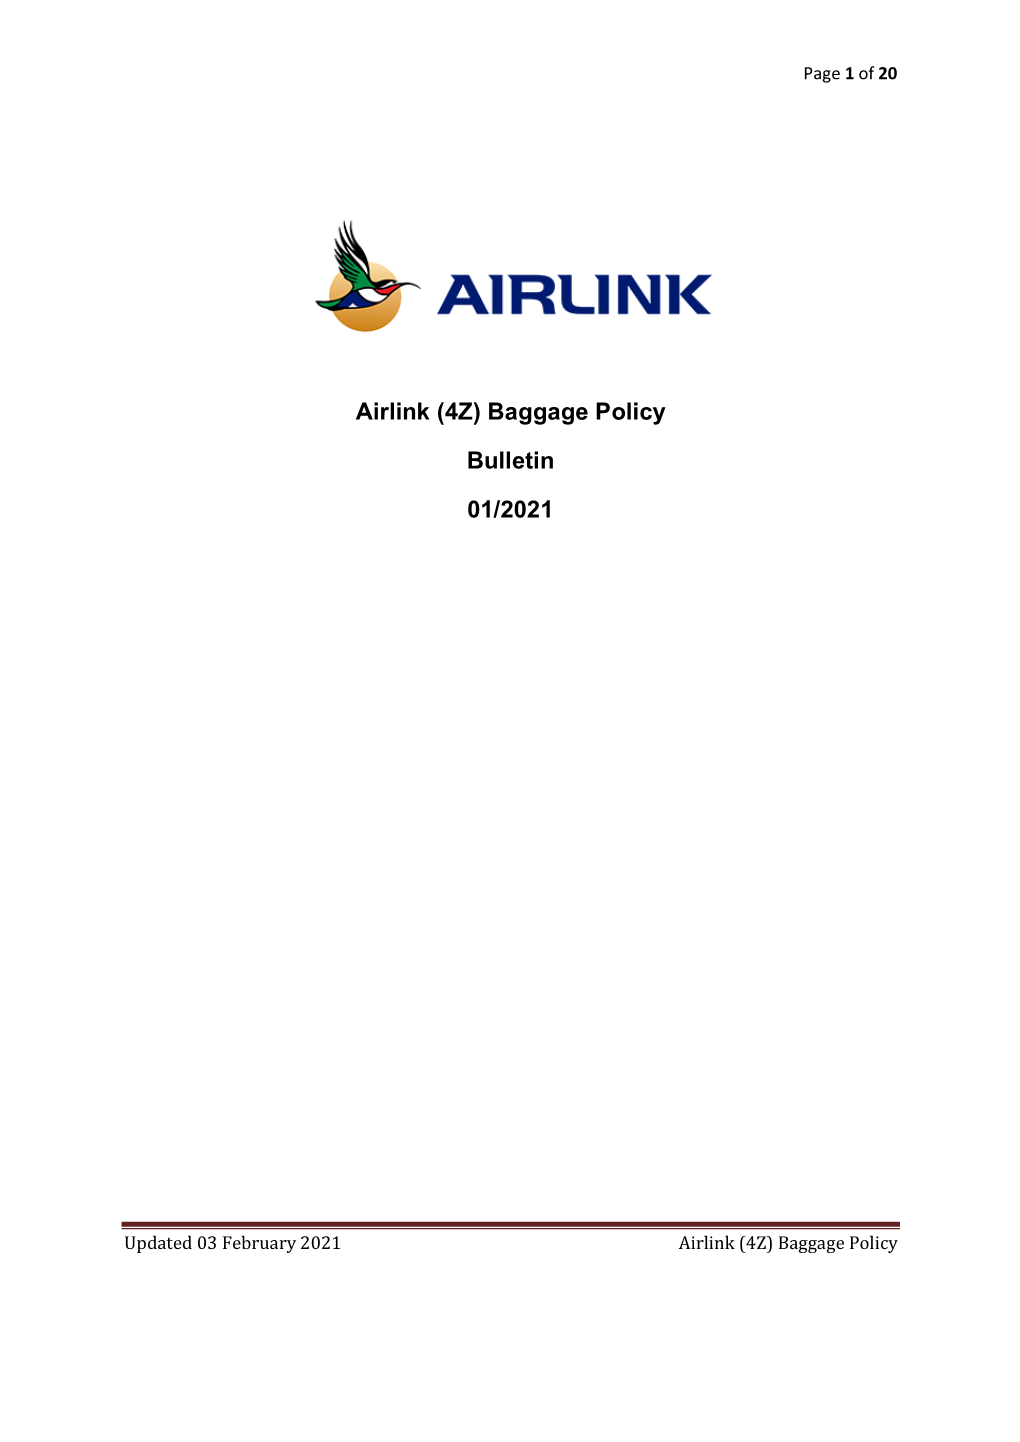 Airlink (4Z) Baggage Policy Bulletin 01/2021